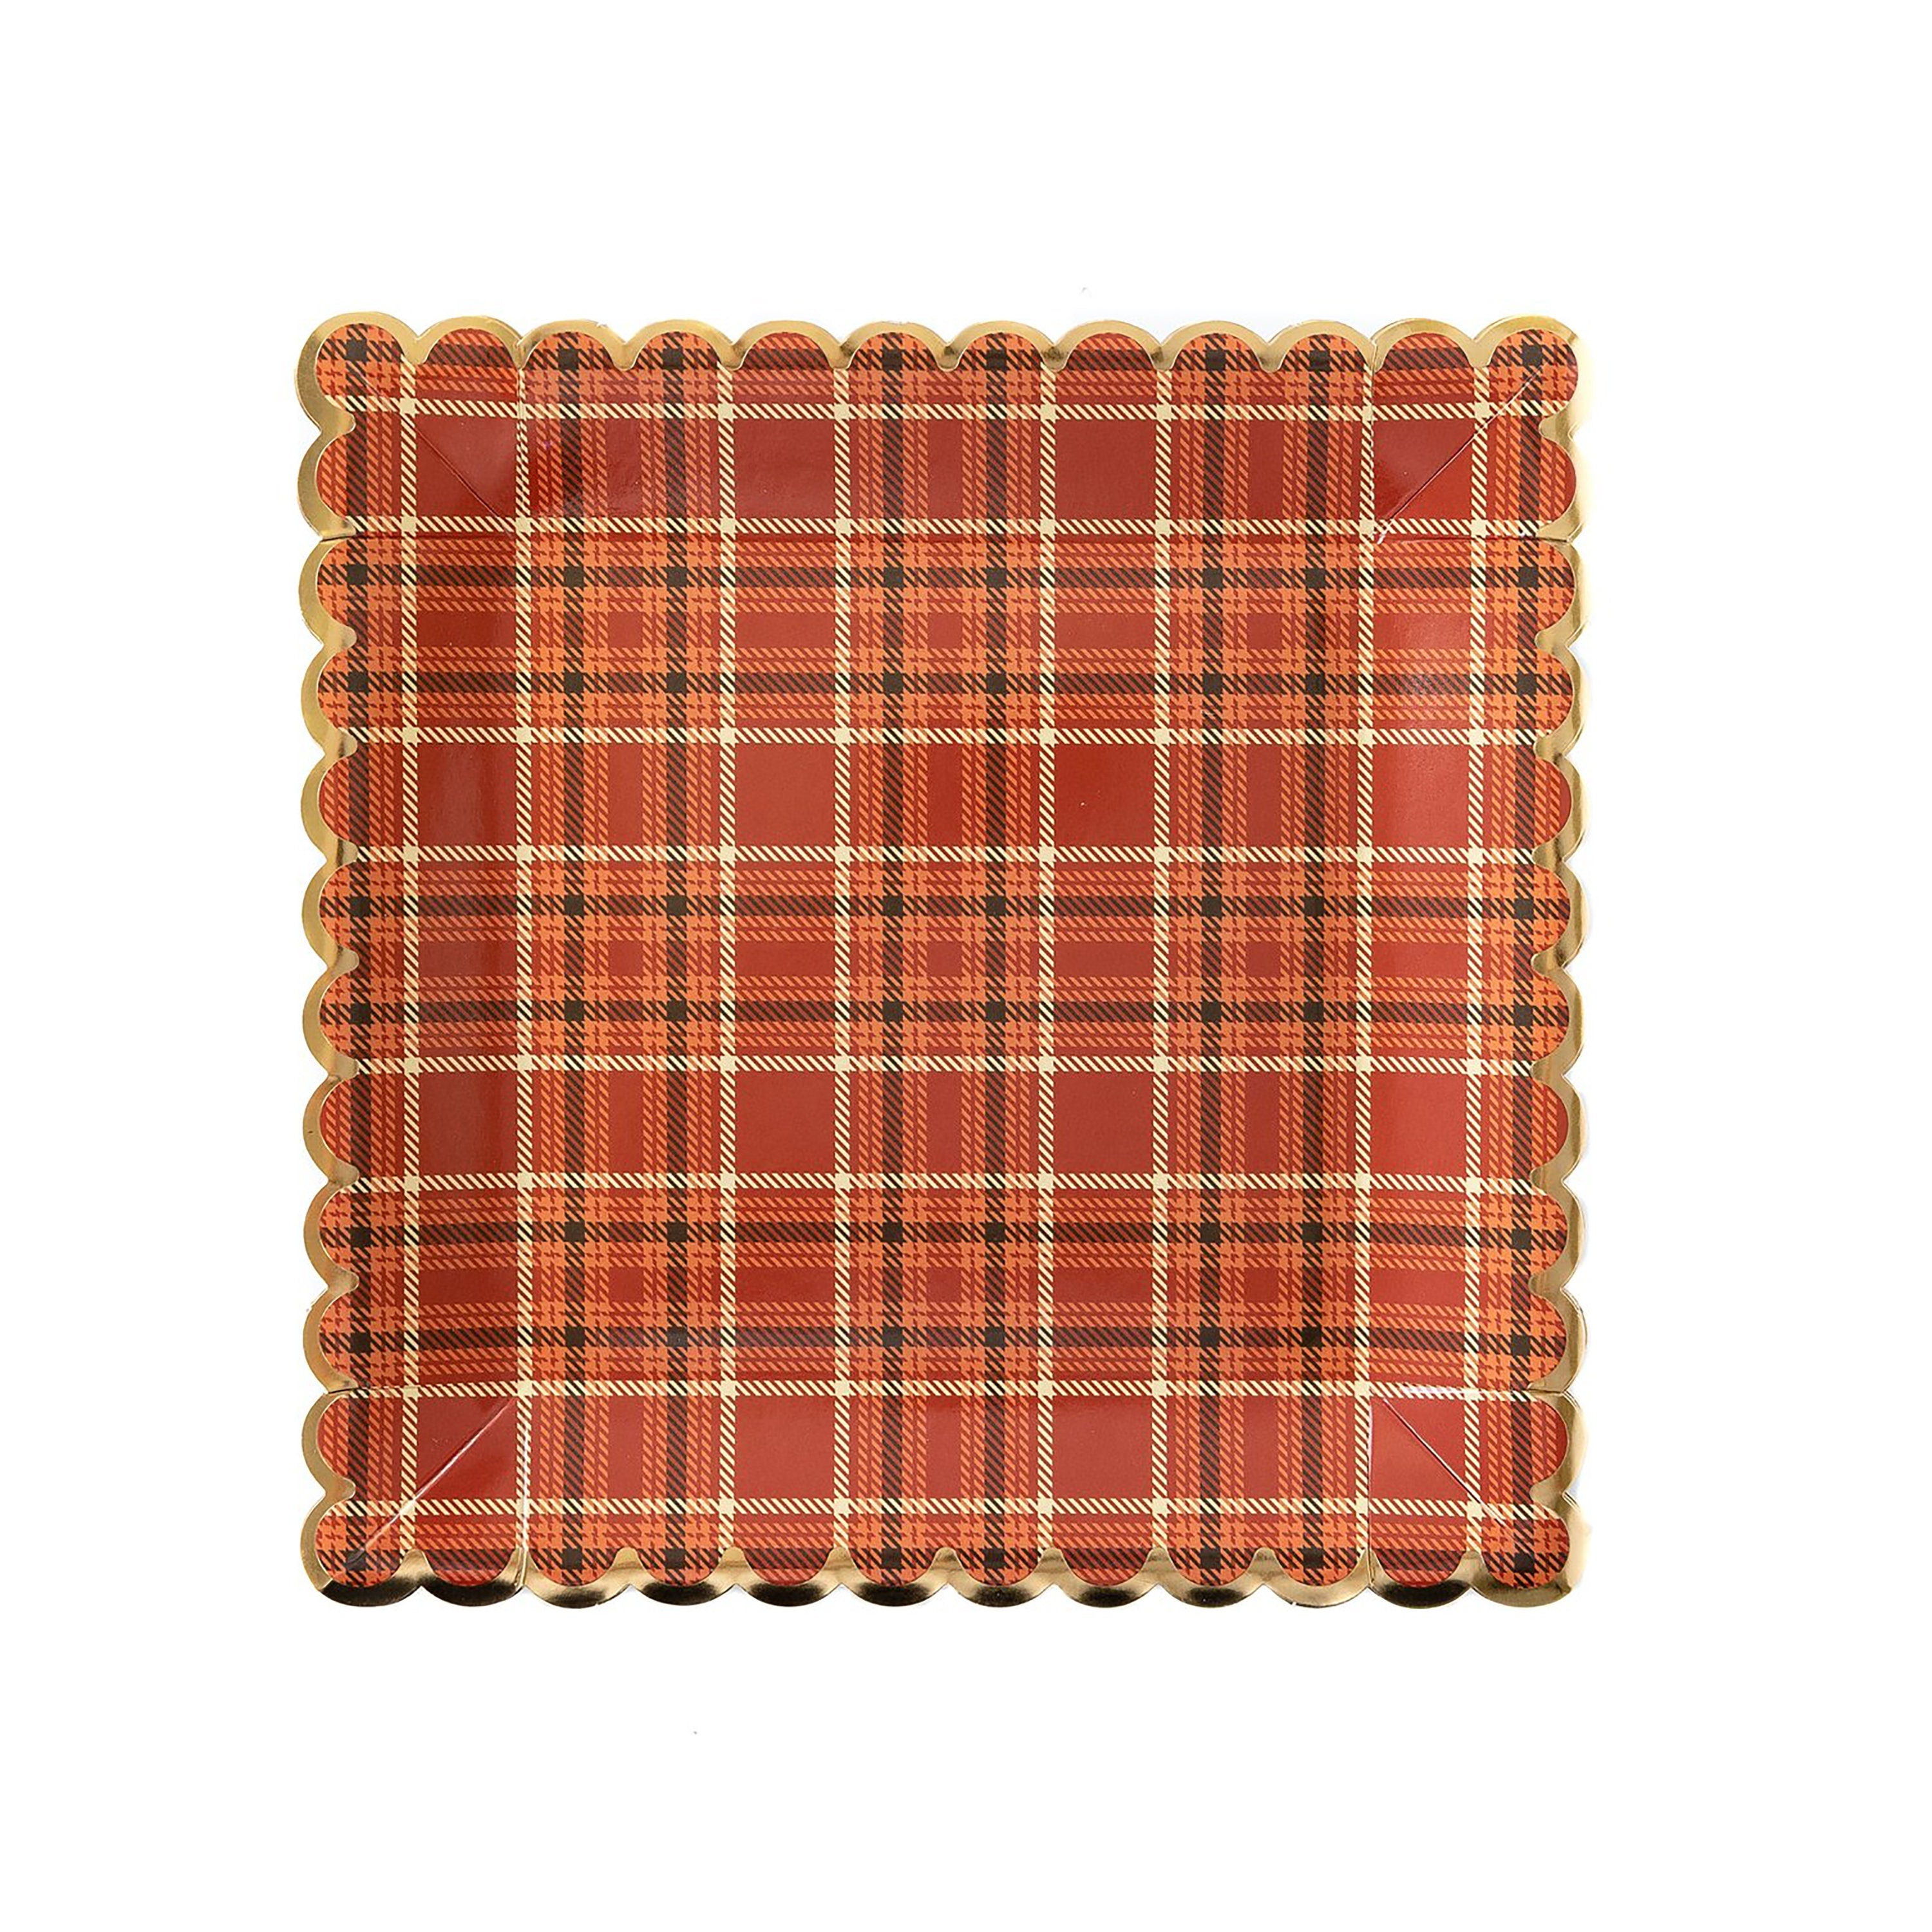 Plaid Paper Plates | Fall Paper Plate - Thanksgiving Paper Plate - Plaid Plate - Harvest Party - Thanksgiving Tableware - Thanksgiving Plate